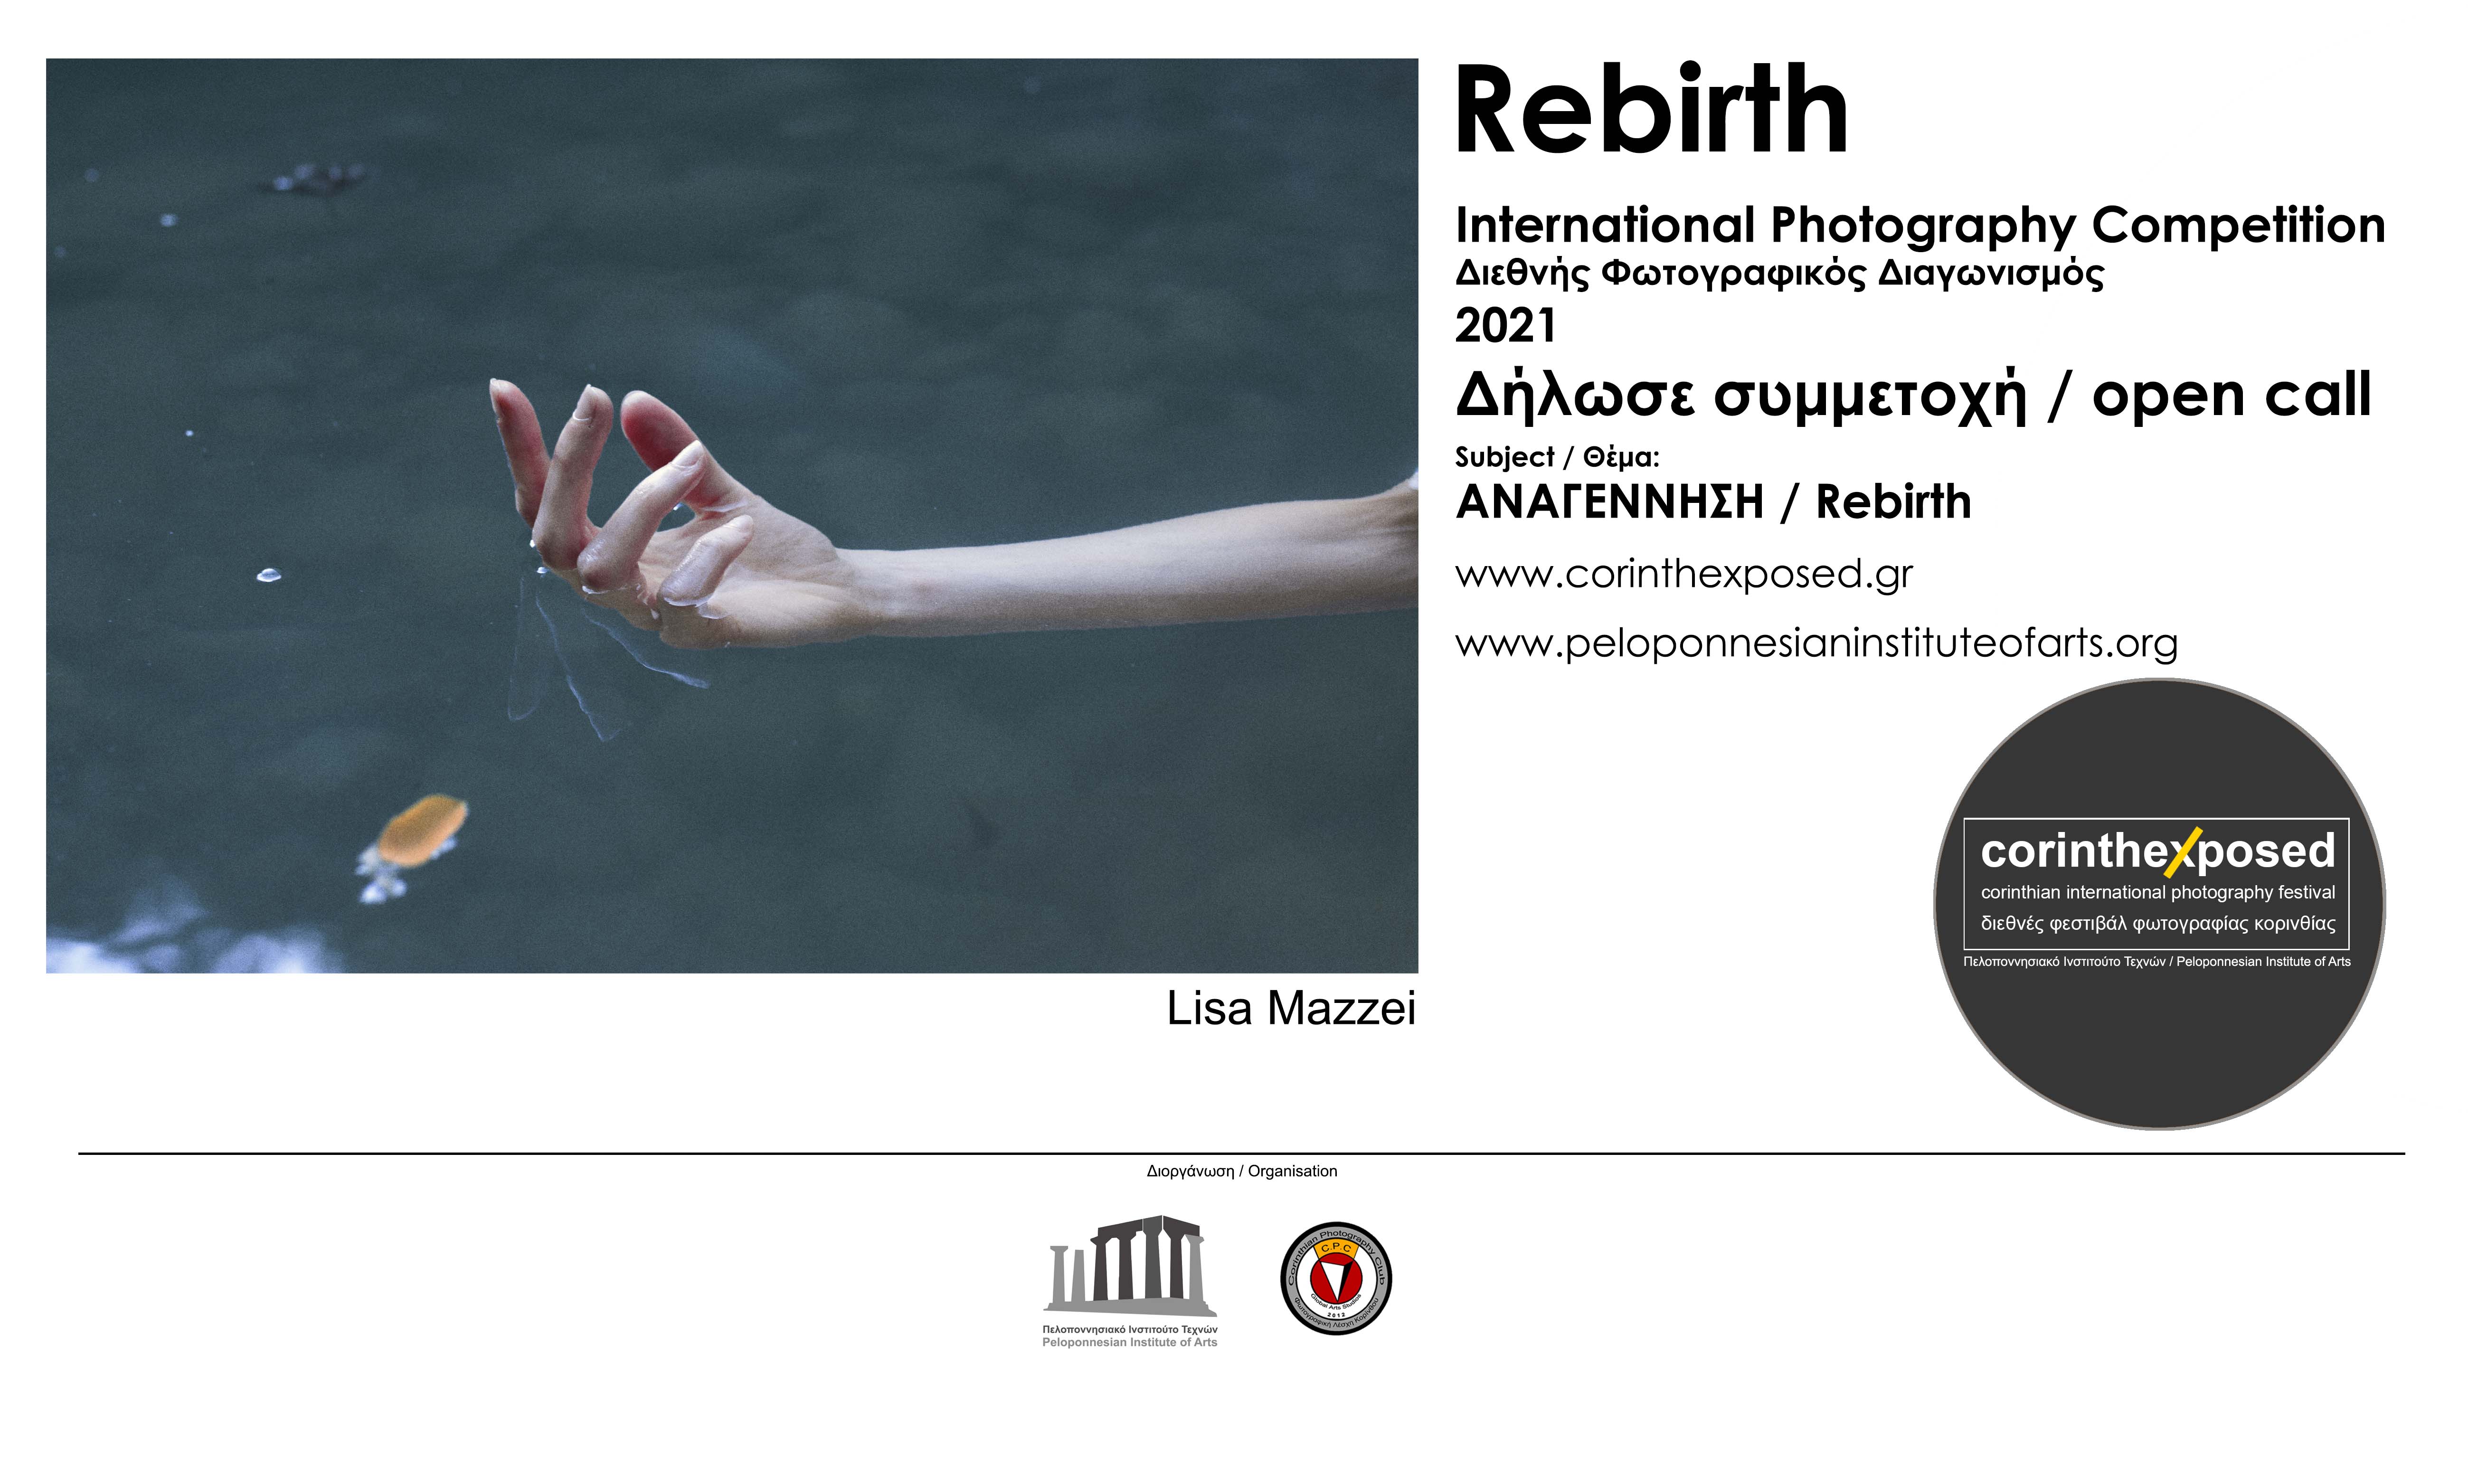 International Photography Competition "REBIRTH" 2021 Open Call